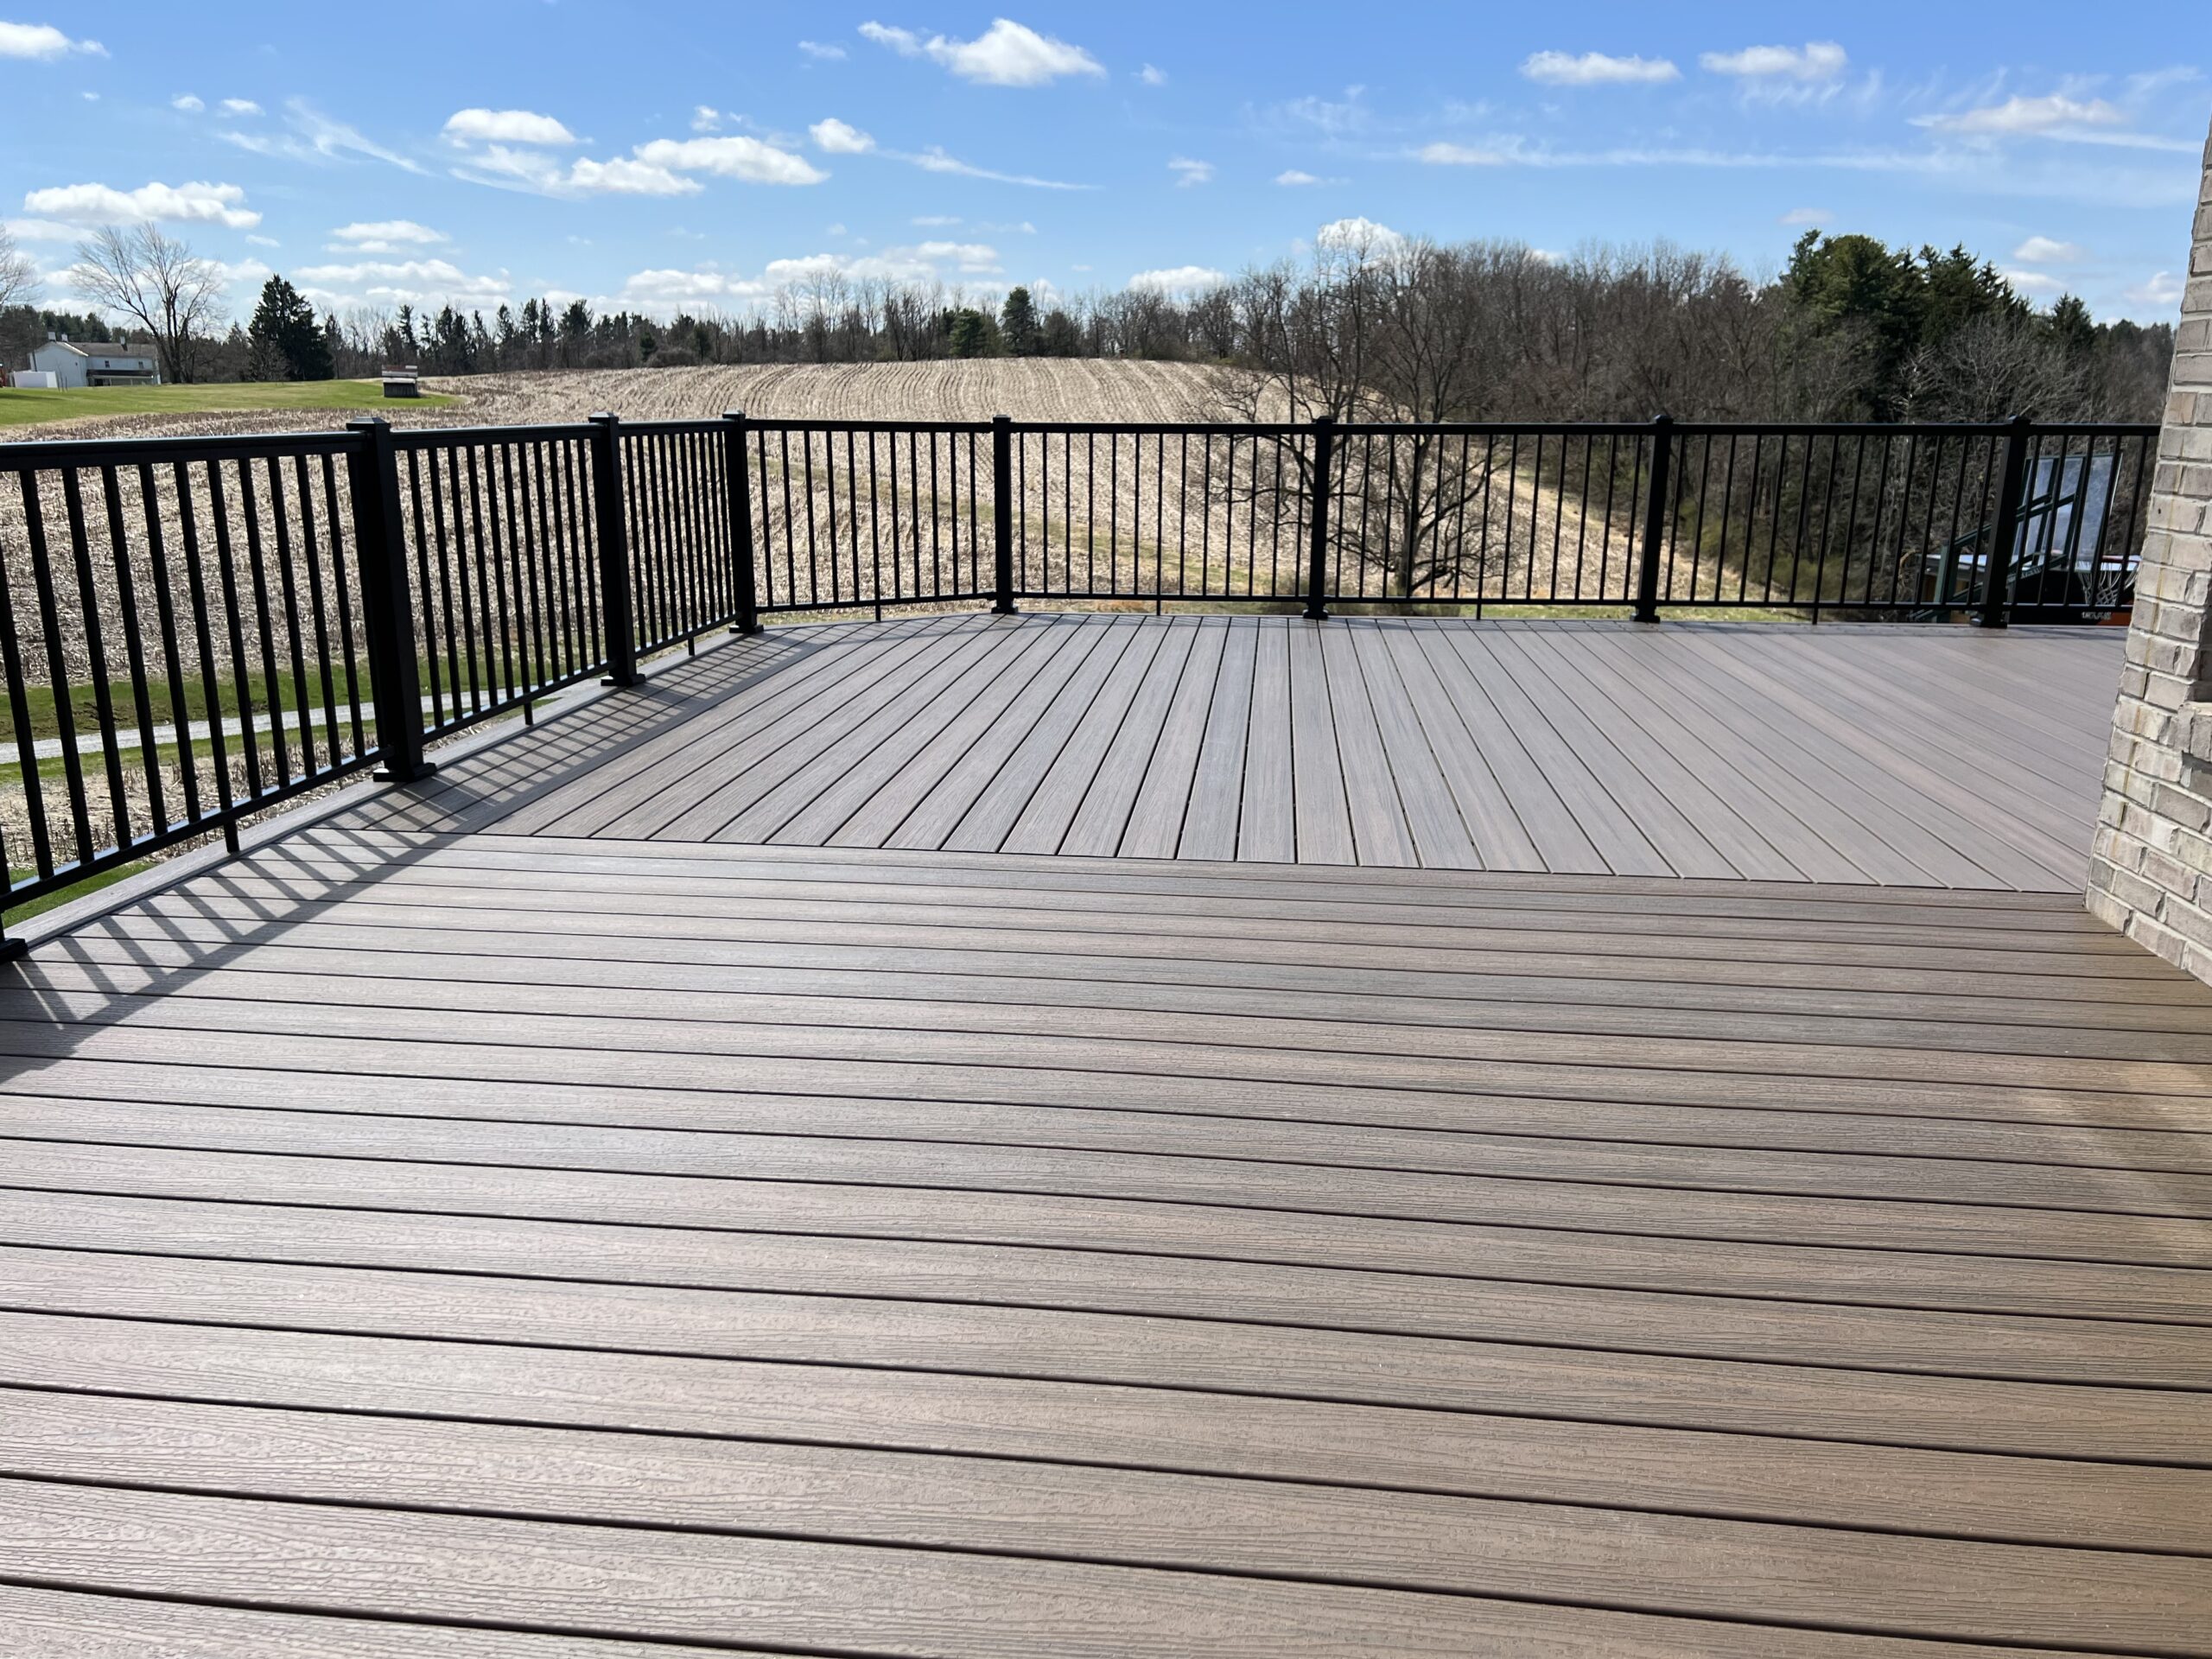 Photo of Trex decking that was installed by GCE Contracting, a TrexPro Gold Installer